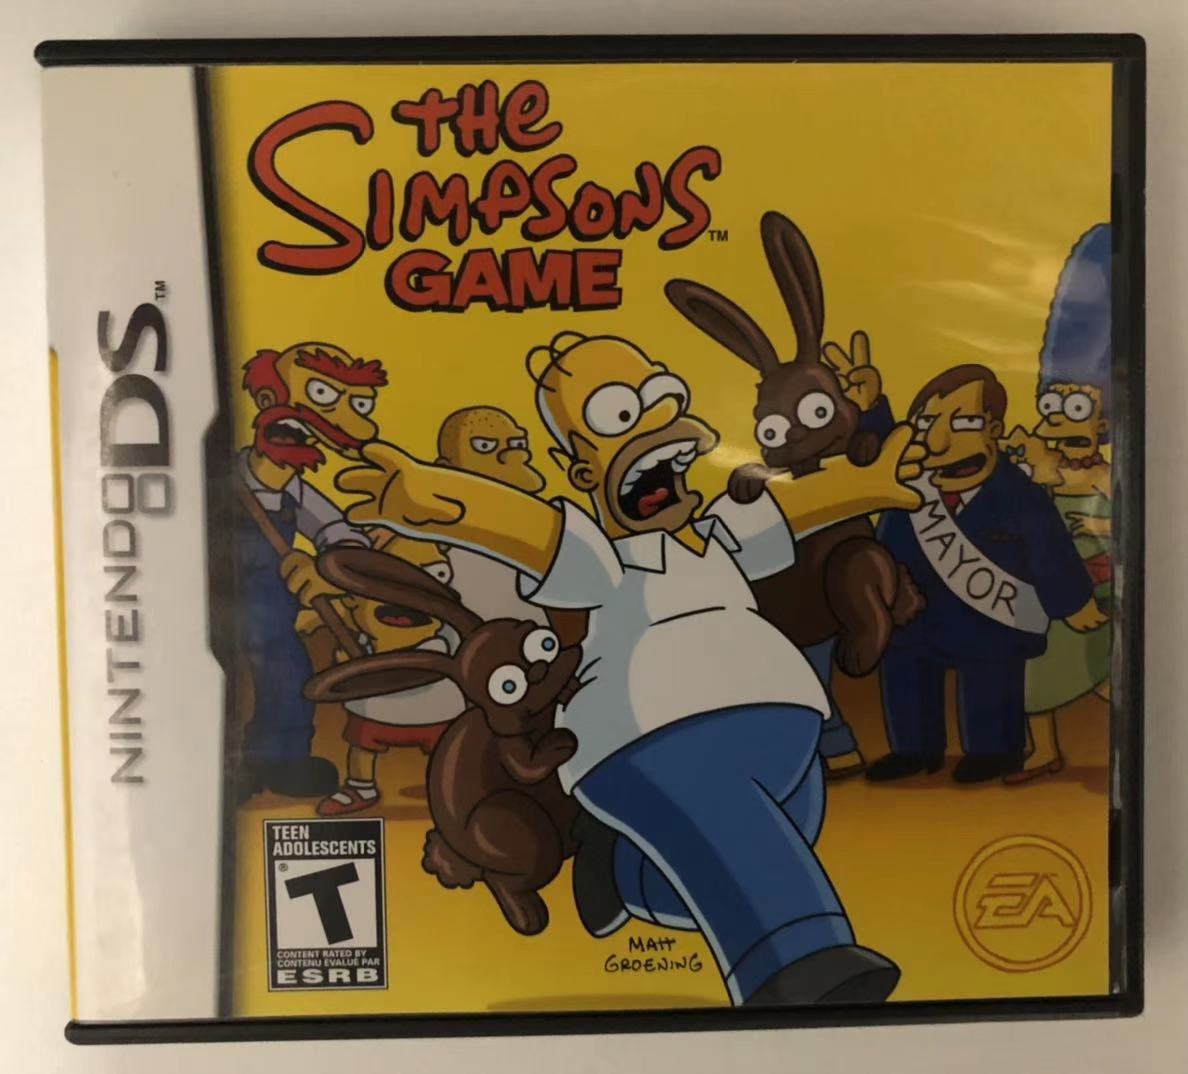 The Simpsons Game『ザ・シンプソンズ・ゲーム』【中古・通常版・北米 